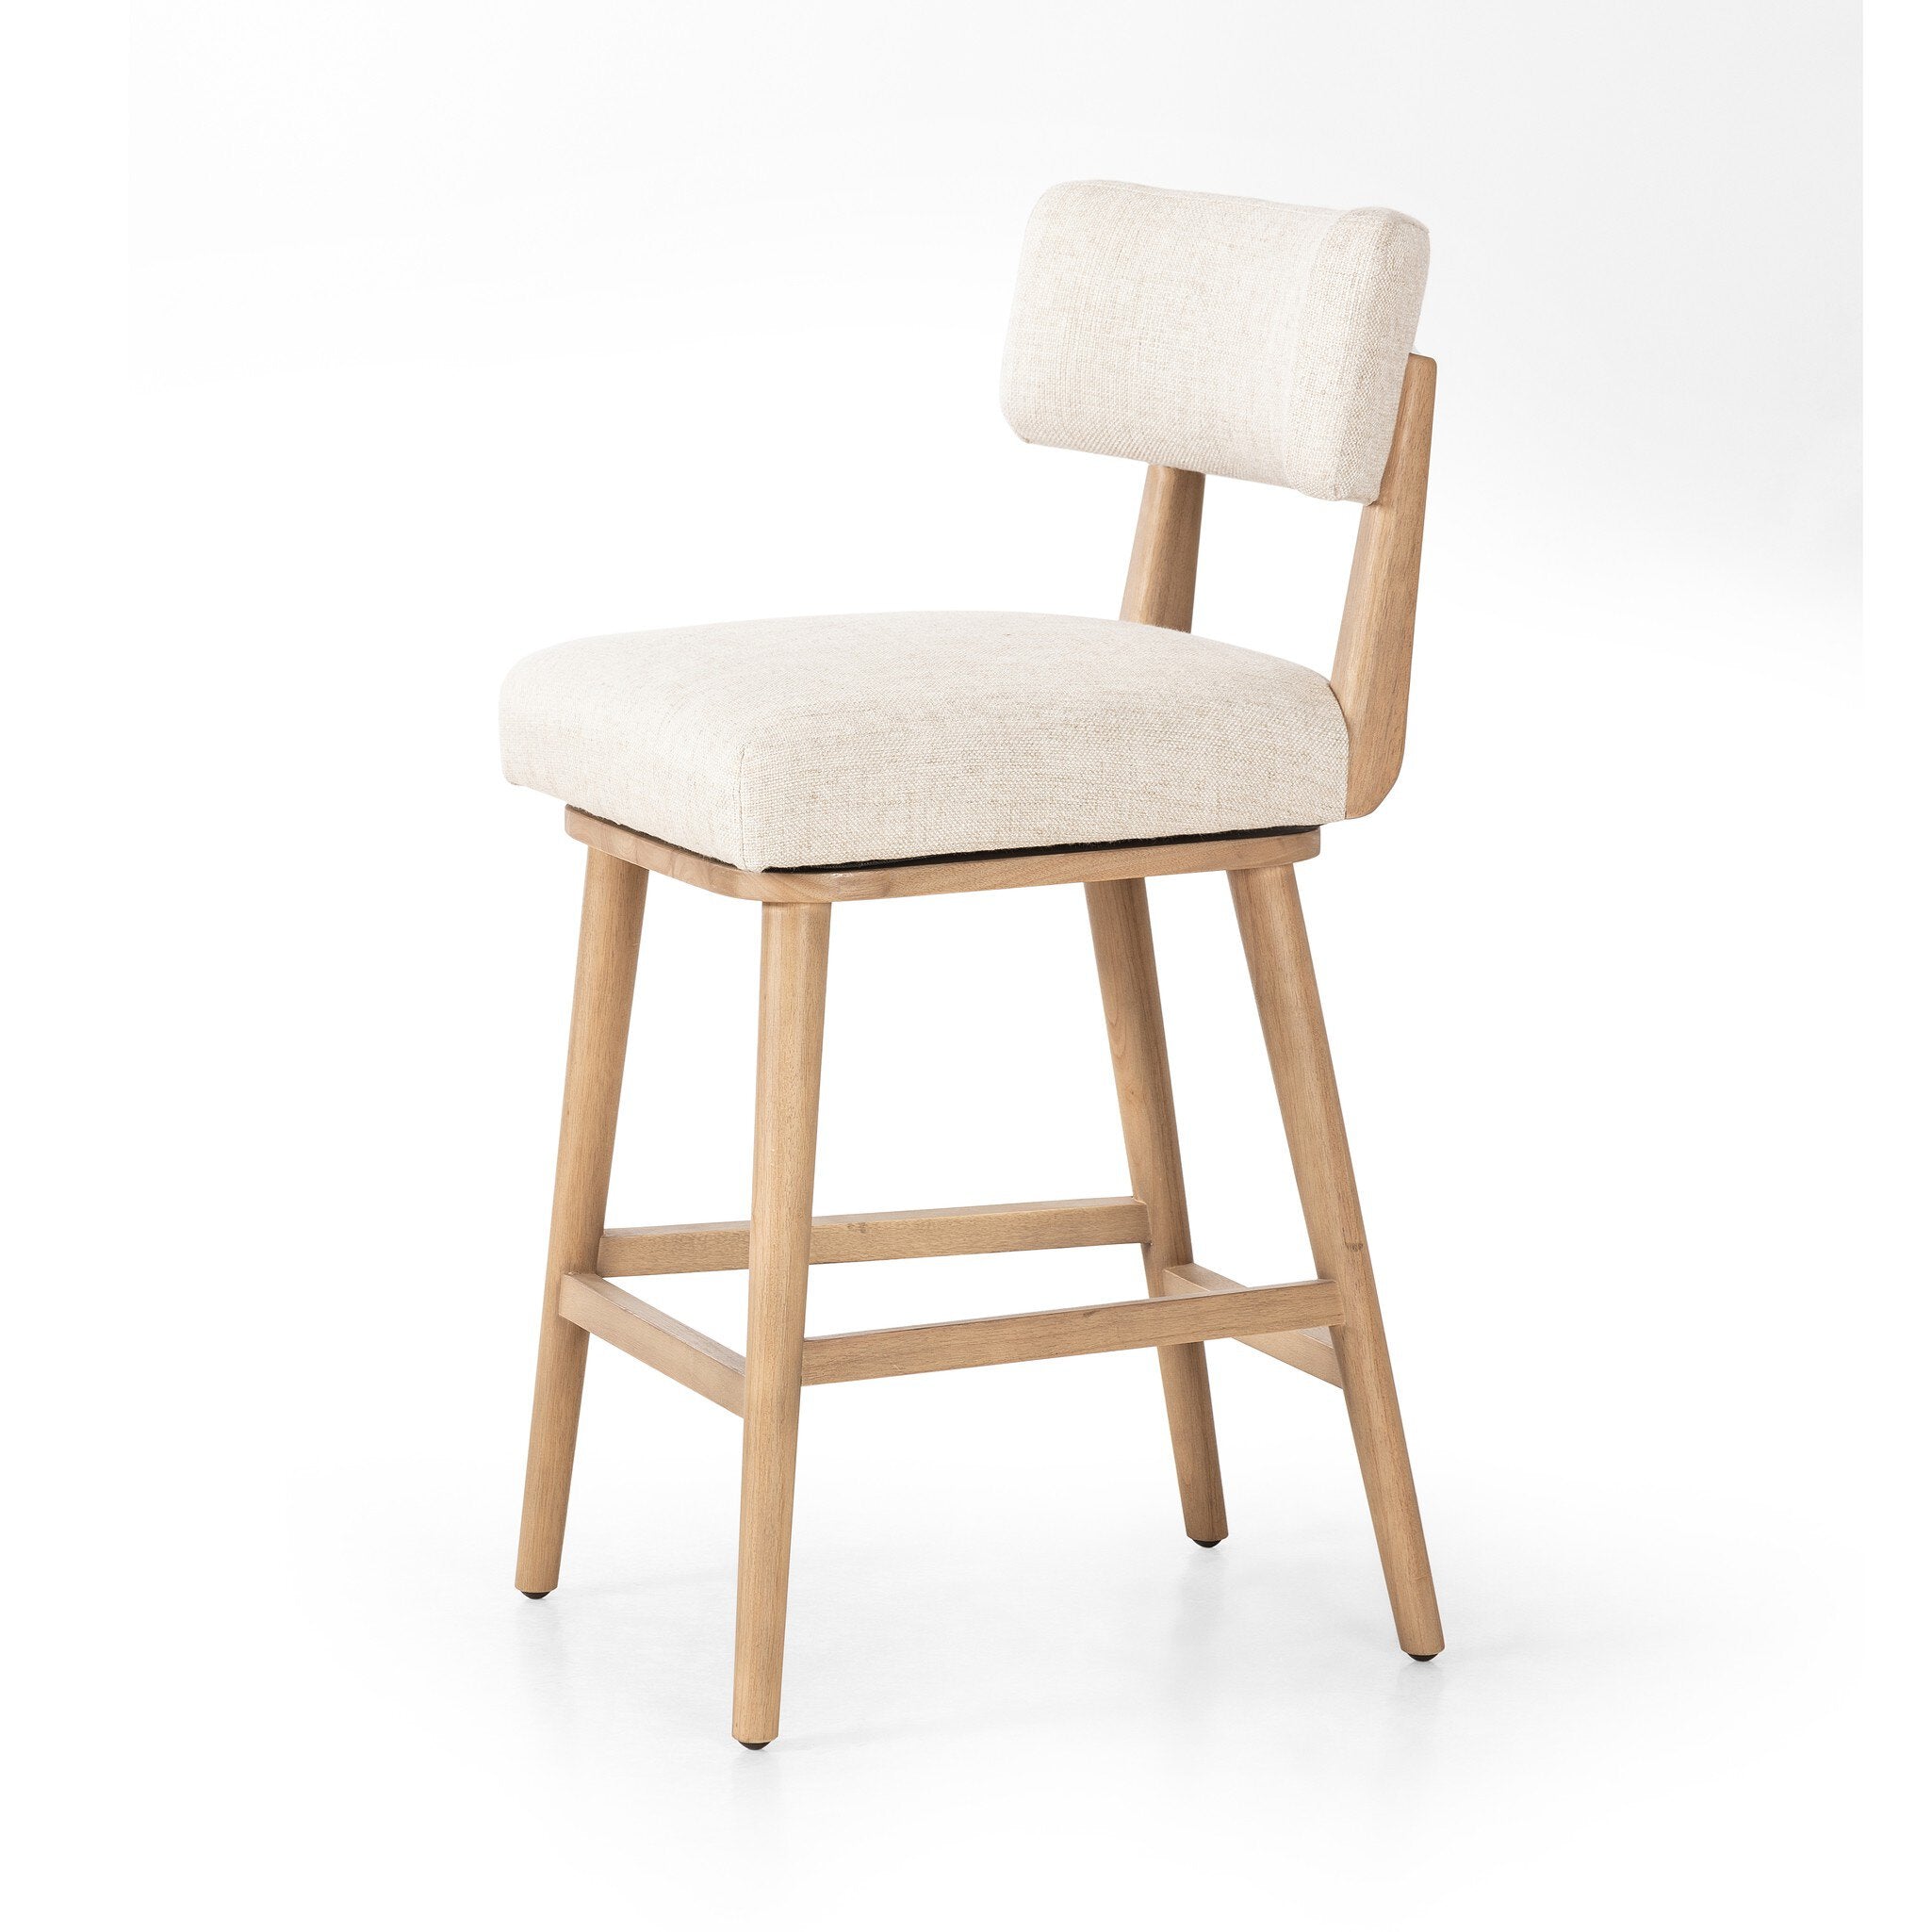 Cardell Swivel Bar + Counter Stool - Essence Natural